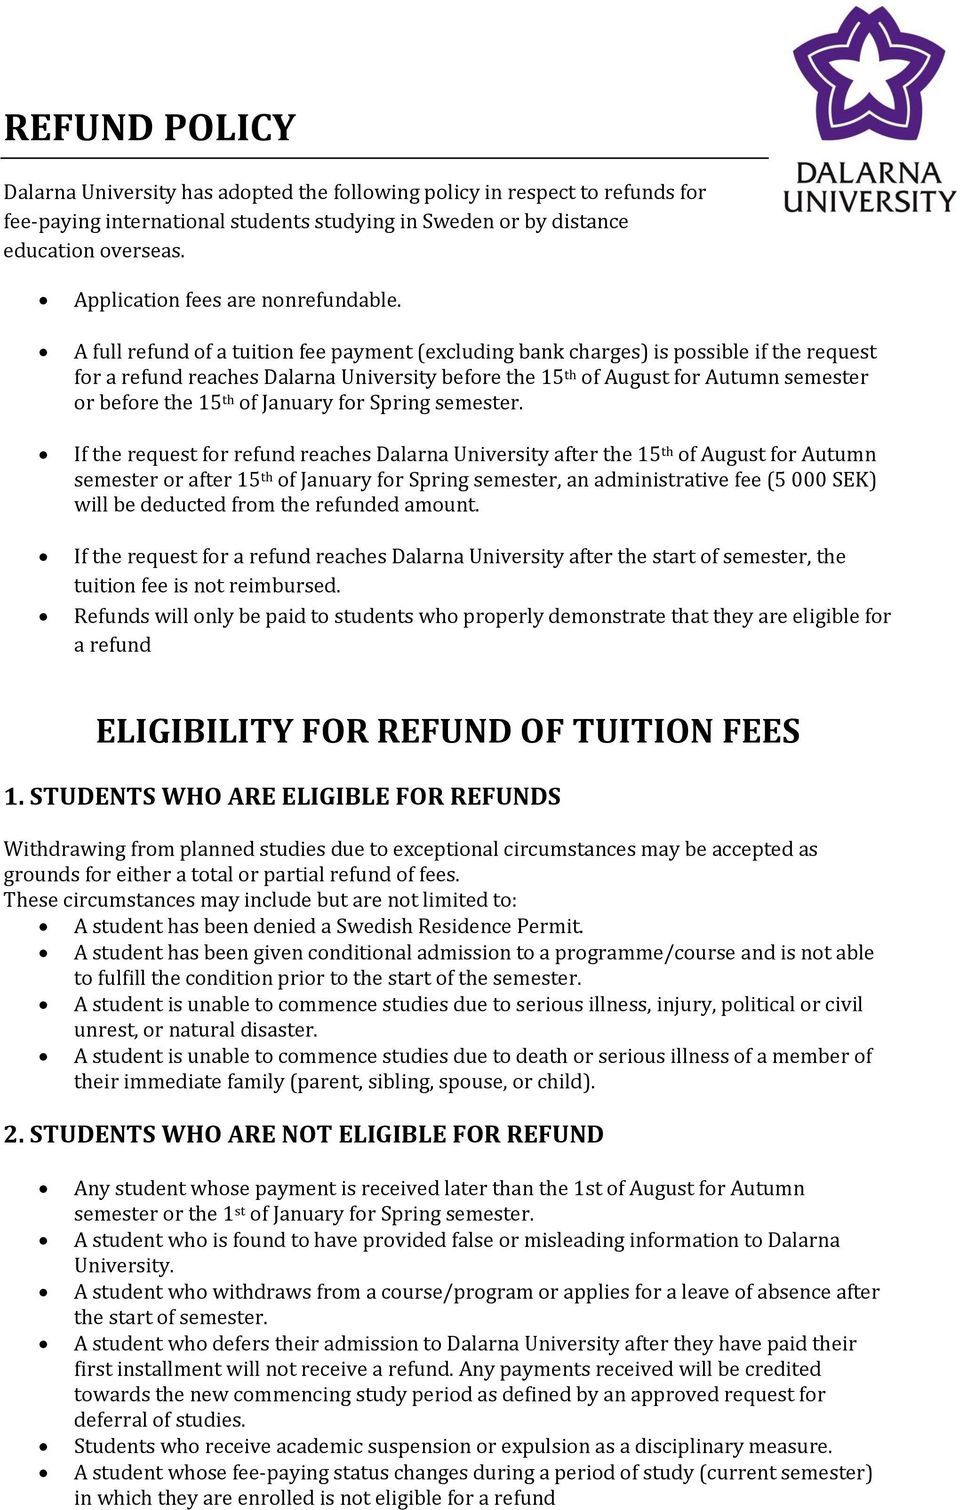 A full refund of a tuition fee payment (excluding bank charges) is possible if the request for a refund reaches Dalarna University before the 15 th of August for Autumn semester or before the 15 th